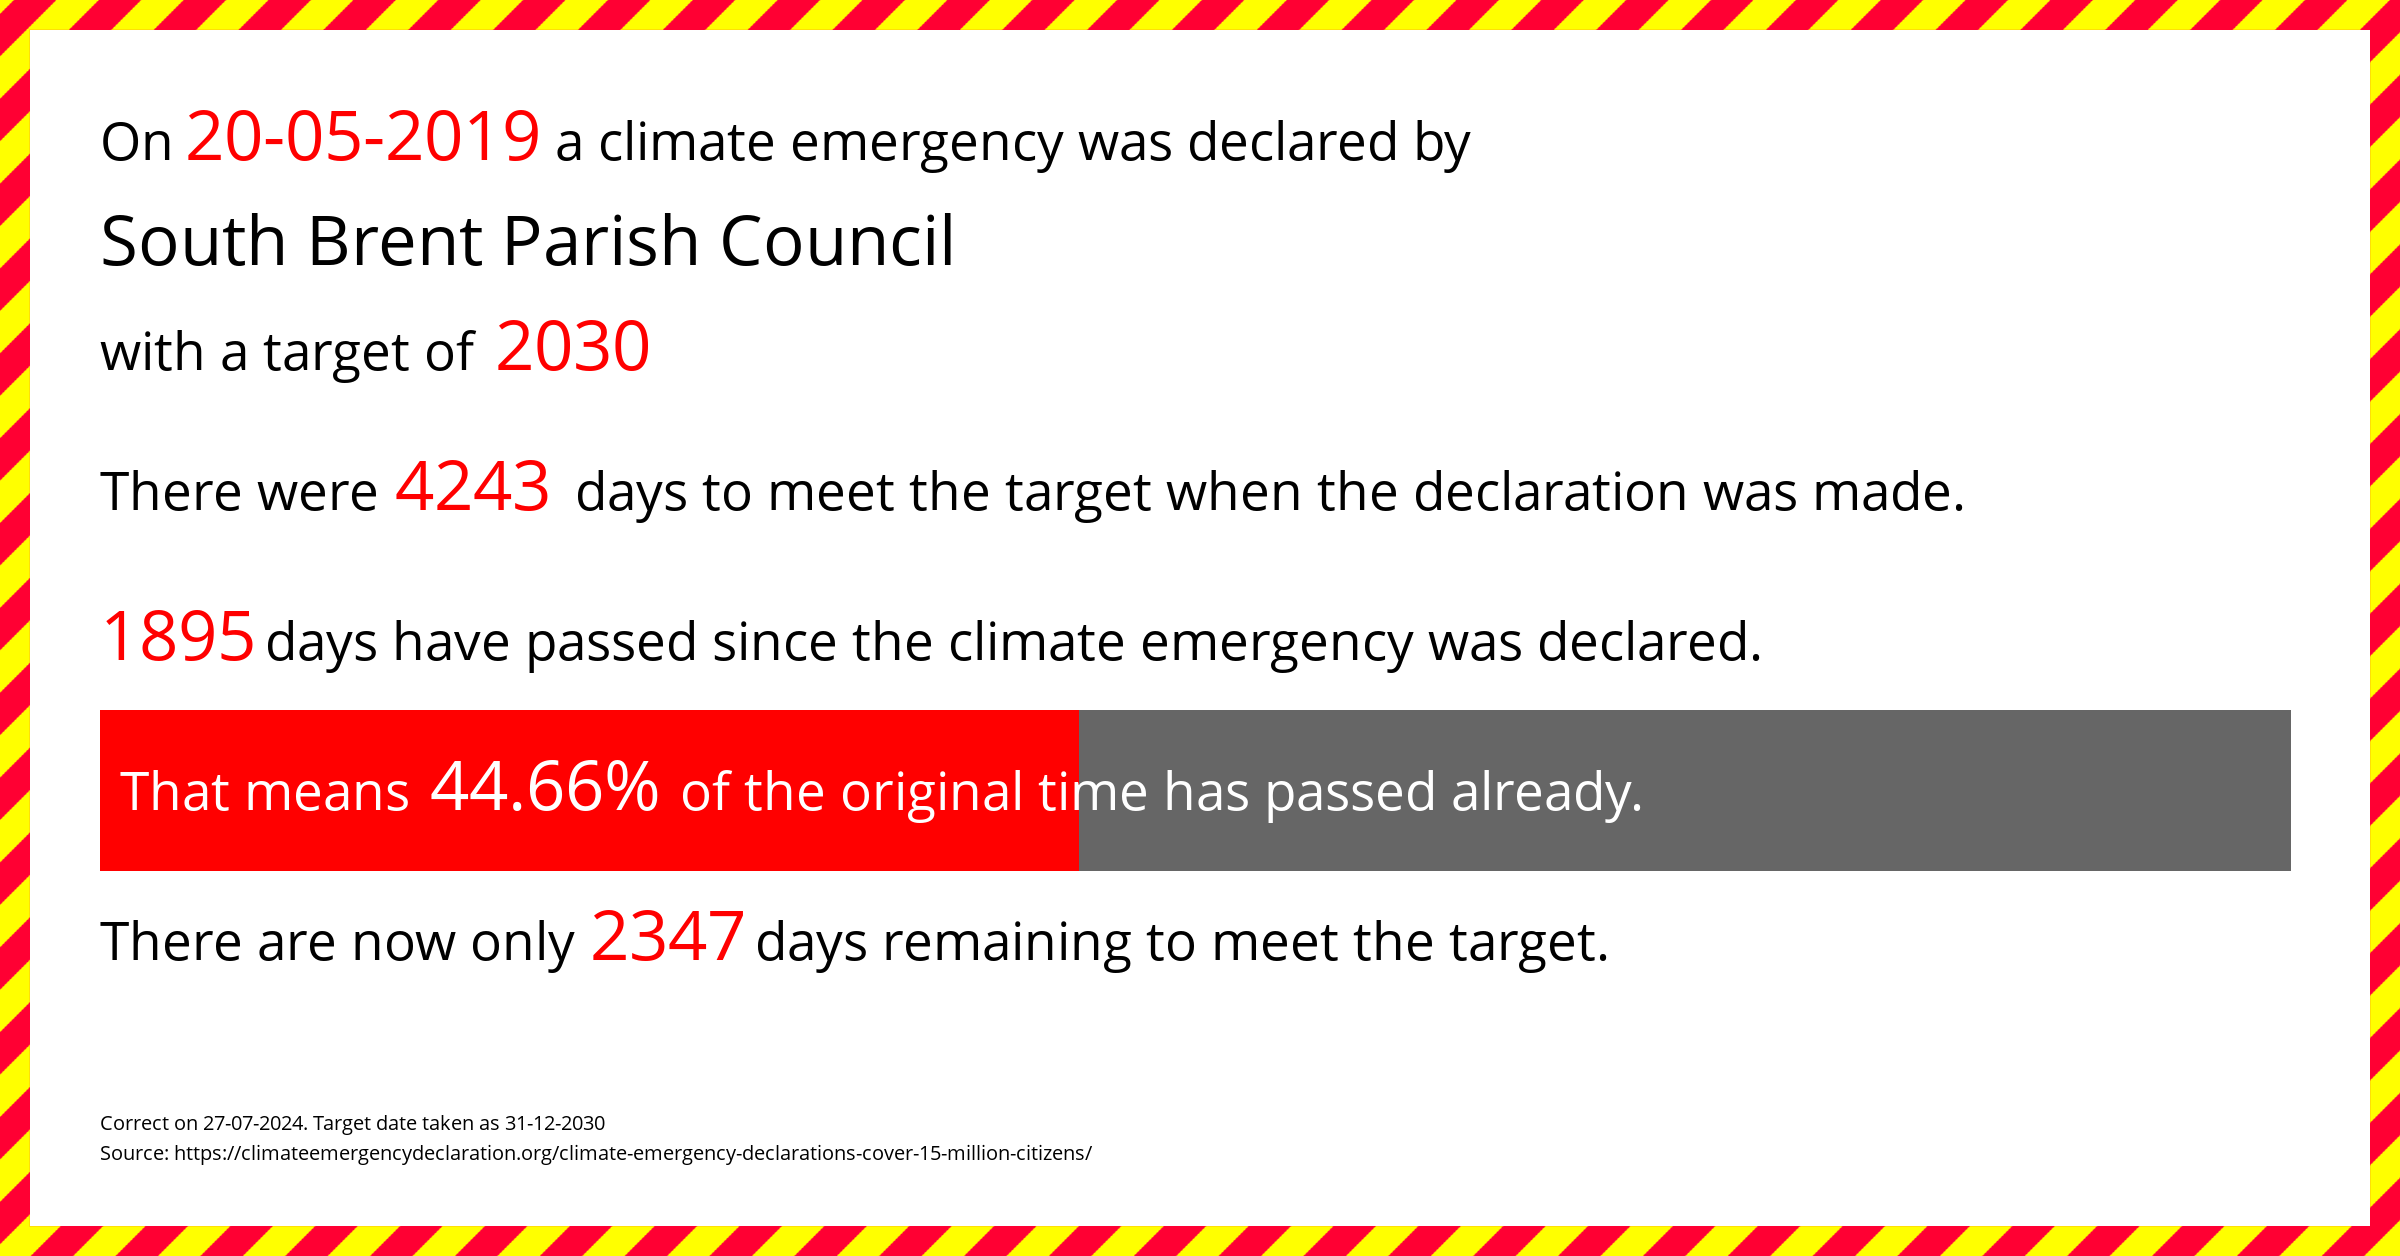 South Brent Parish Council declared a Climate emergency on Monday 20th May 2019, with a target of 2030.